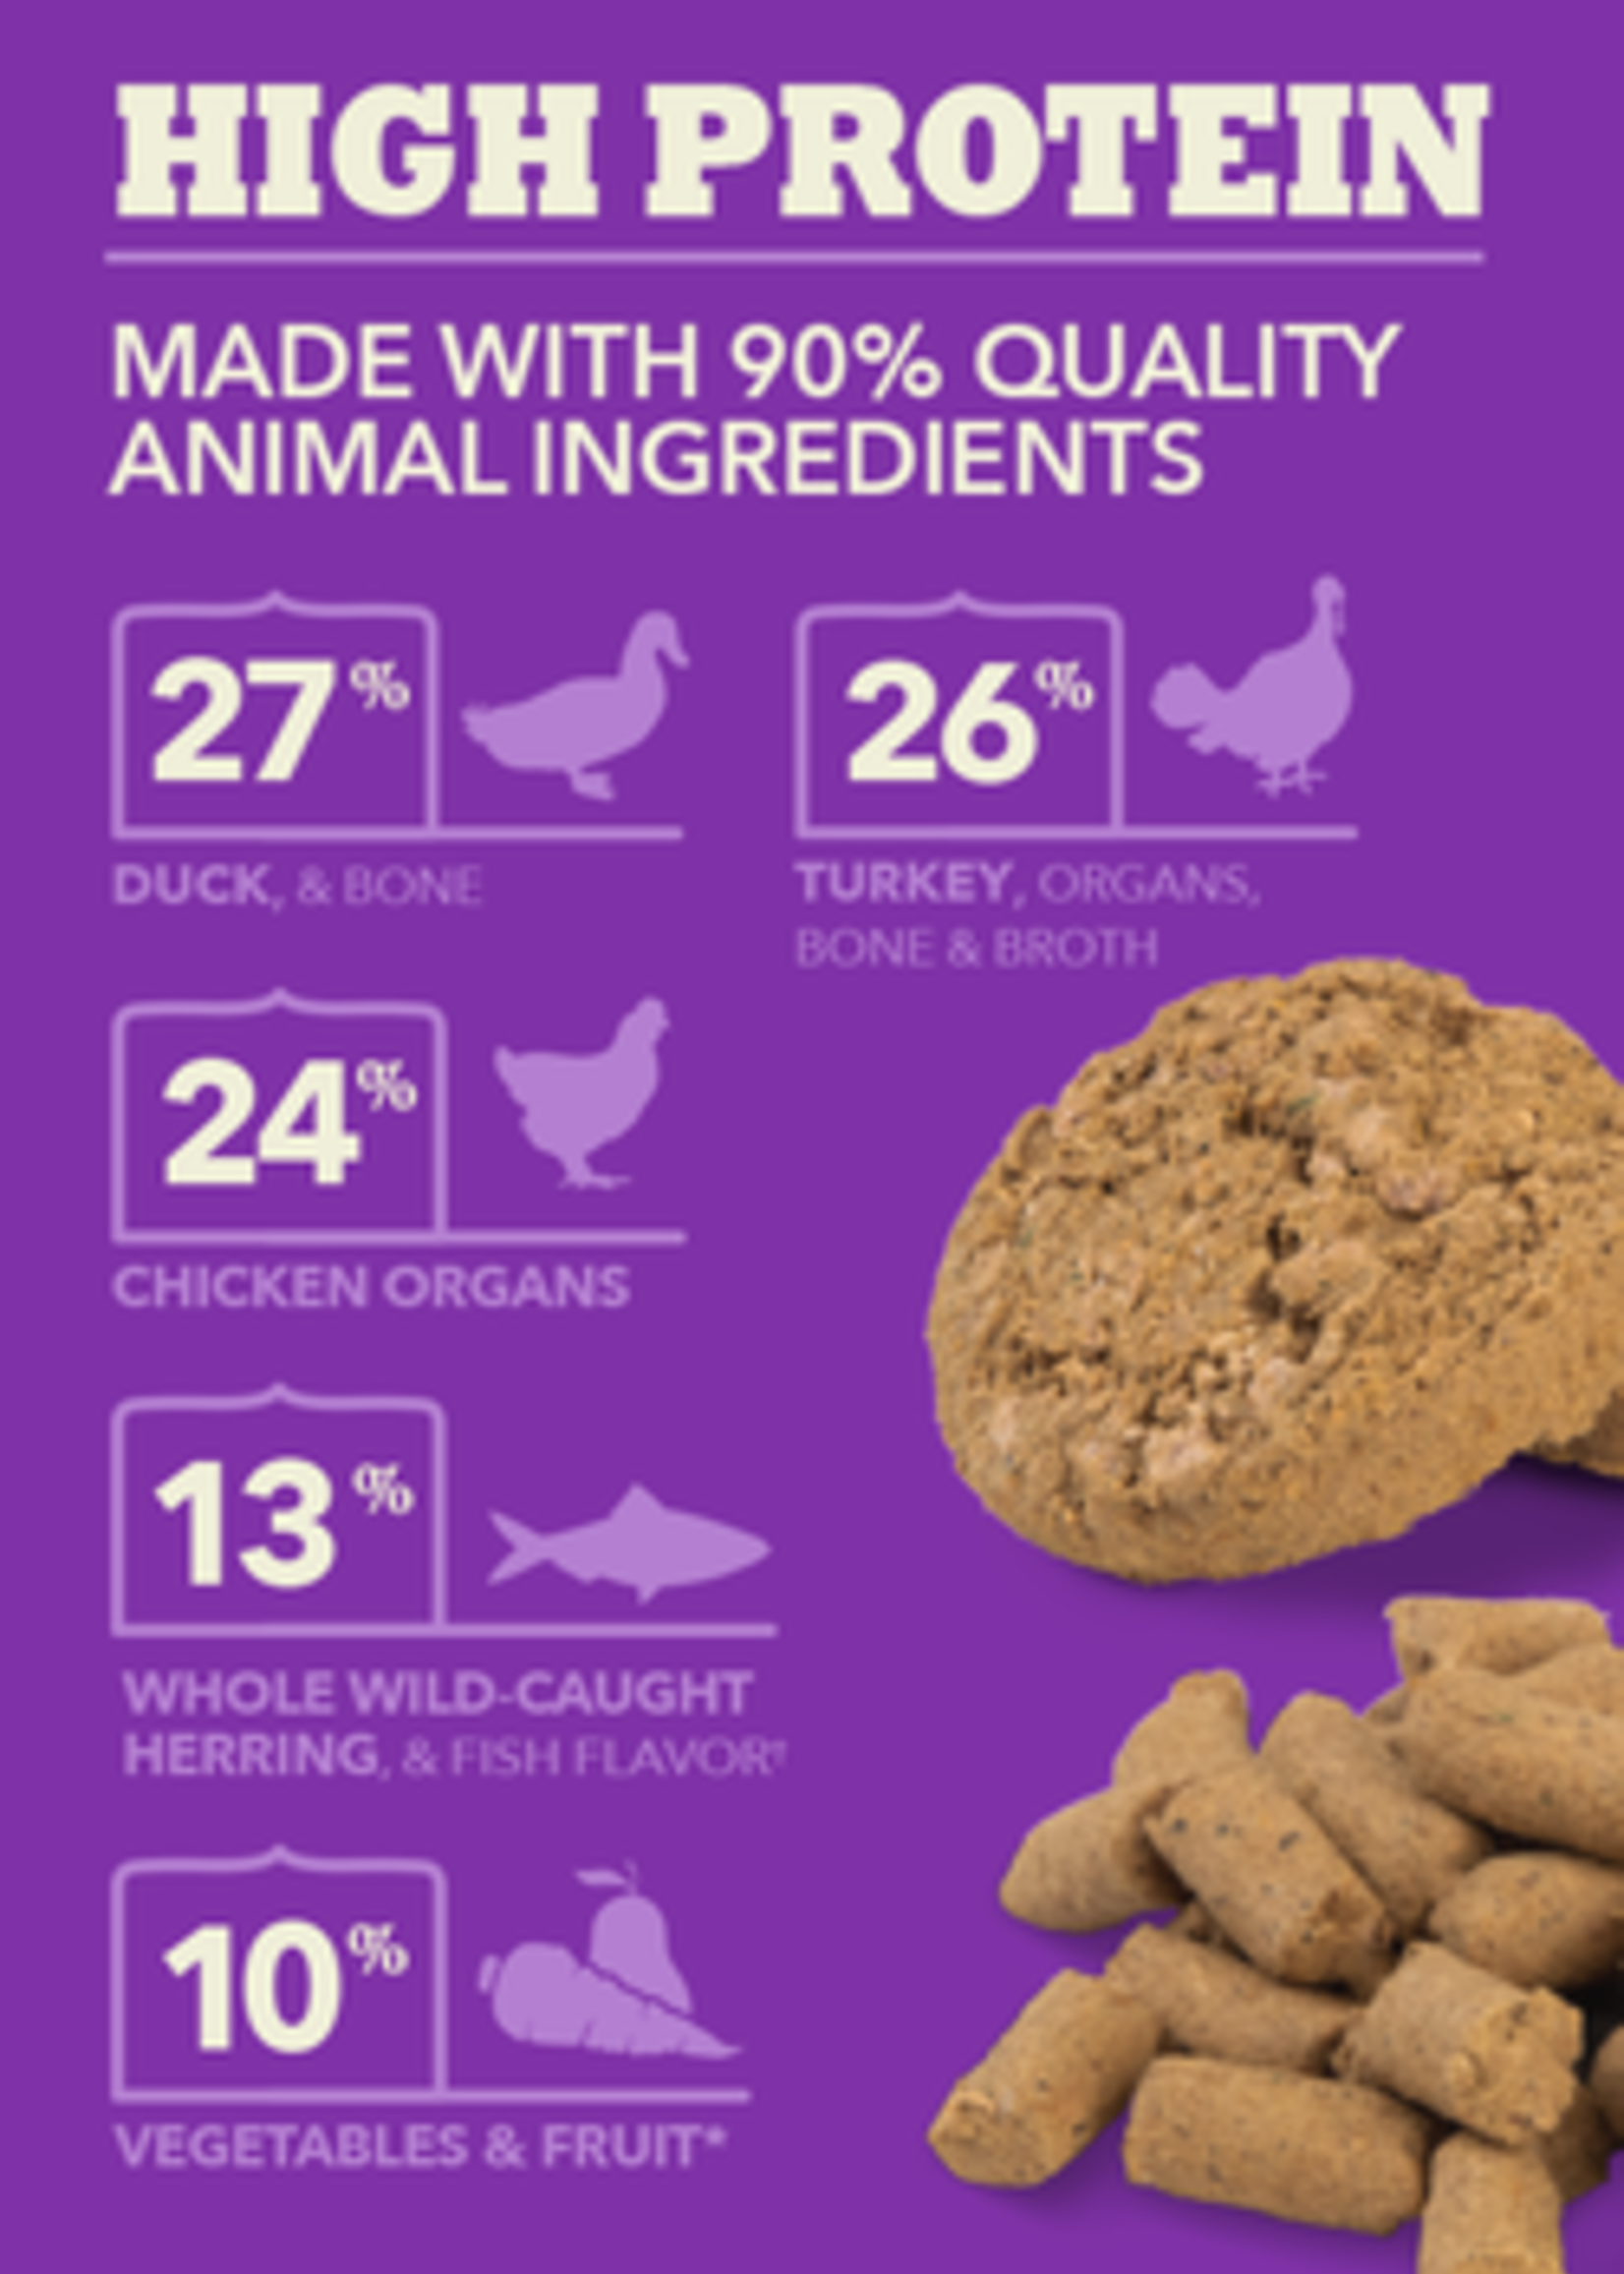 Acana Acana Freeze-Dried Morsels (227g) Duck Recipe with Turkey, & Chicken Liver